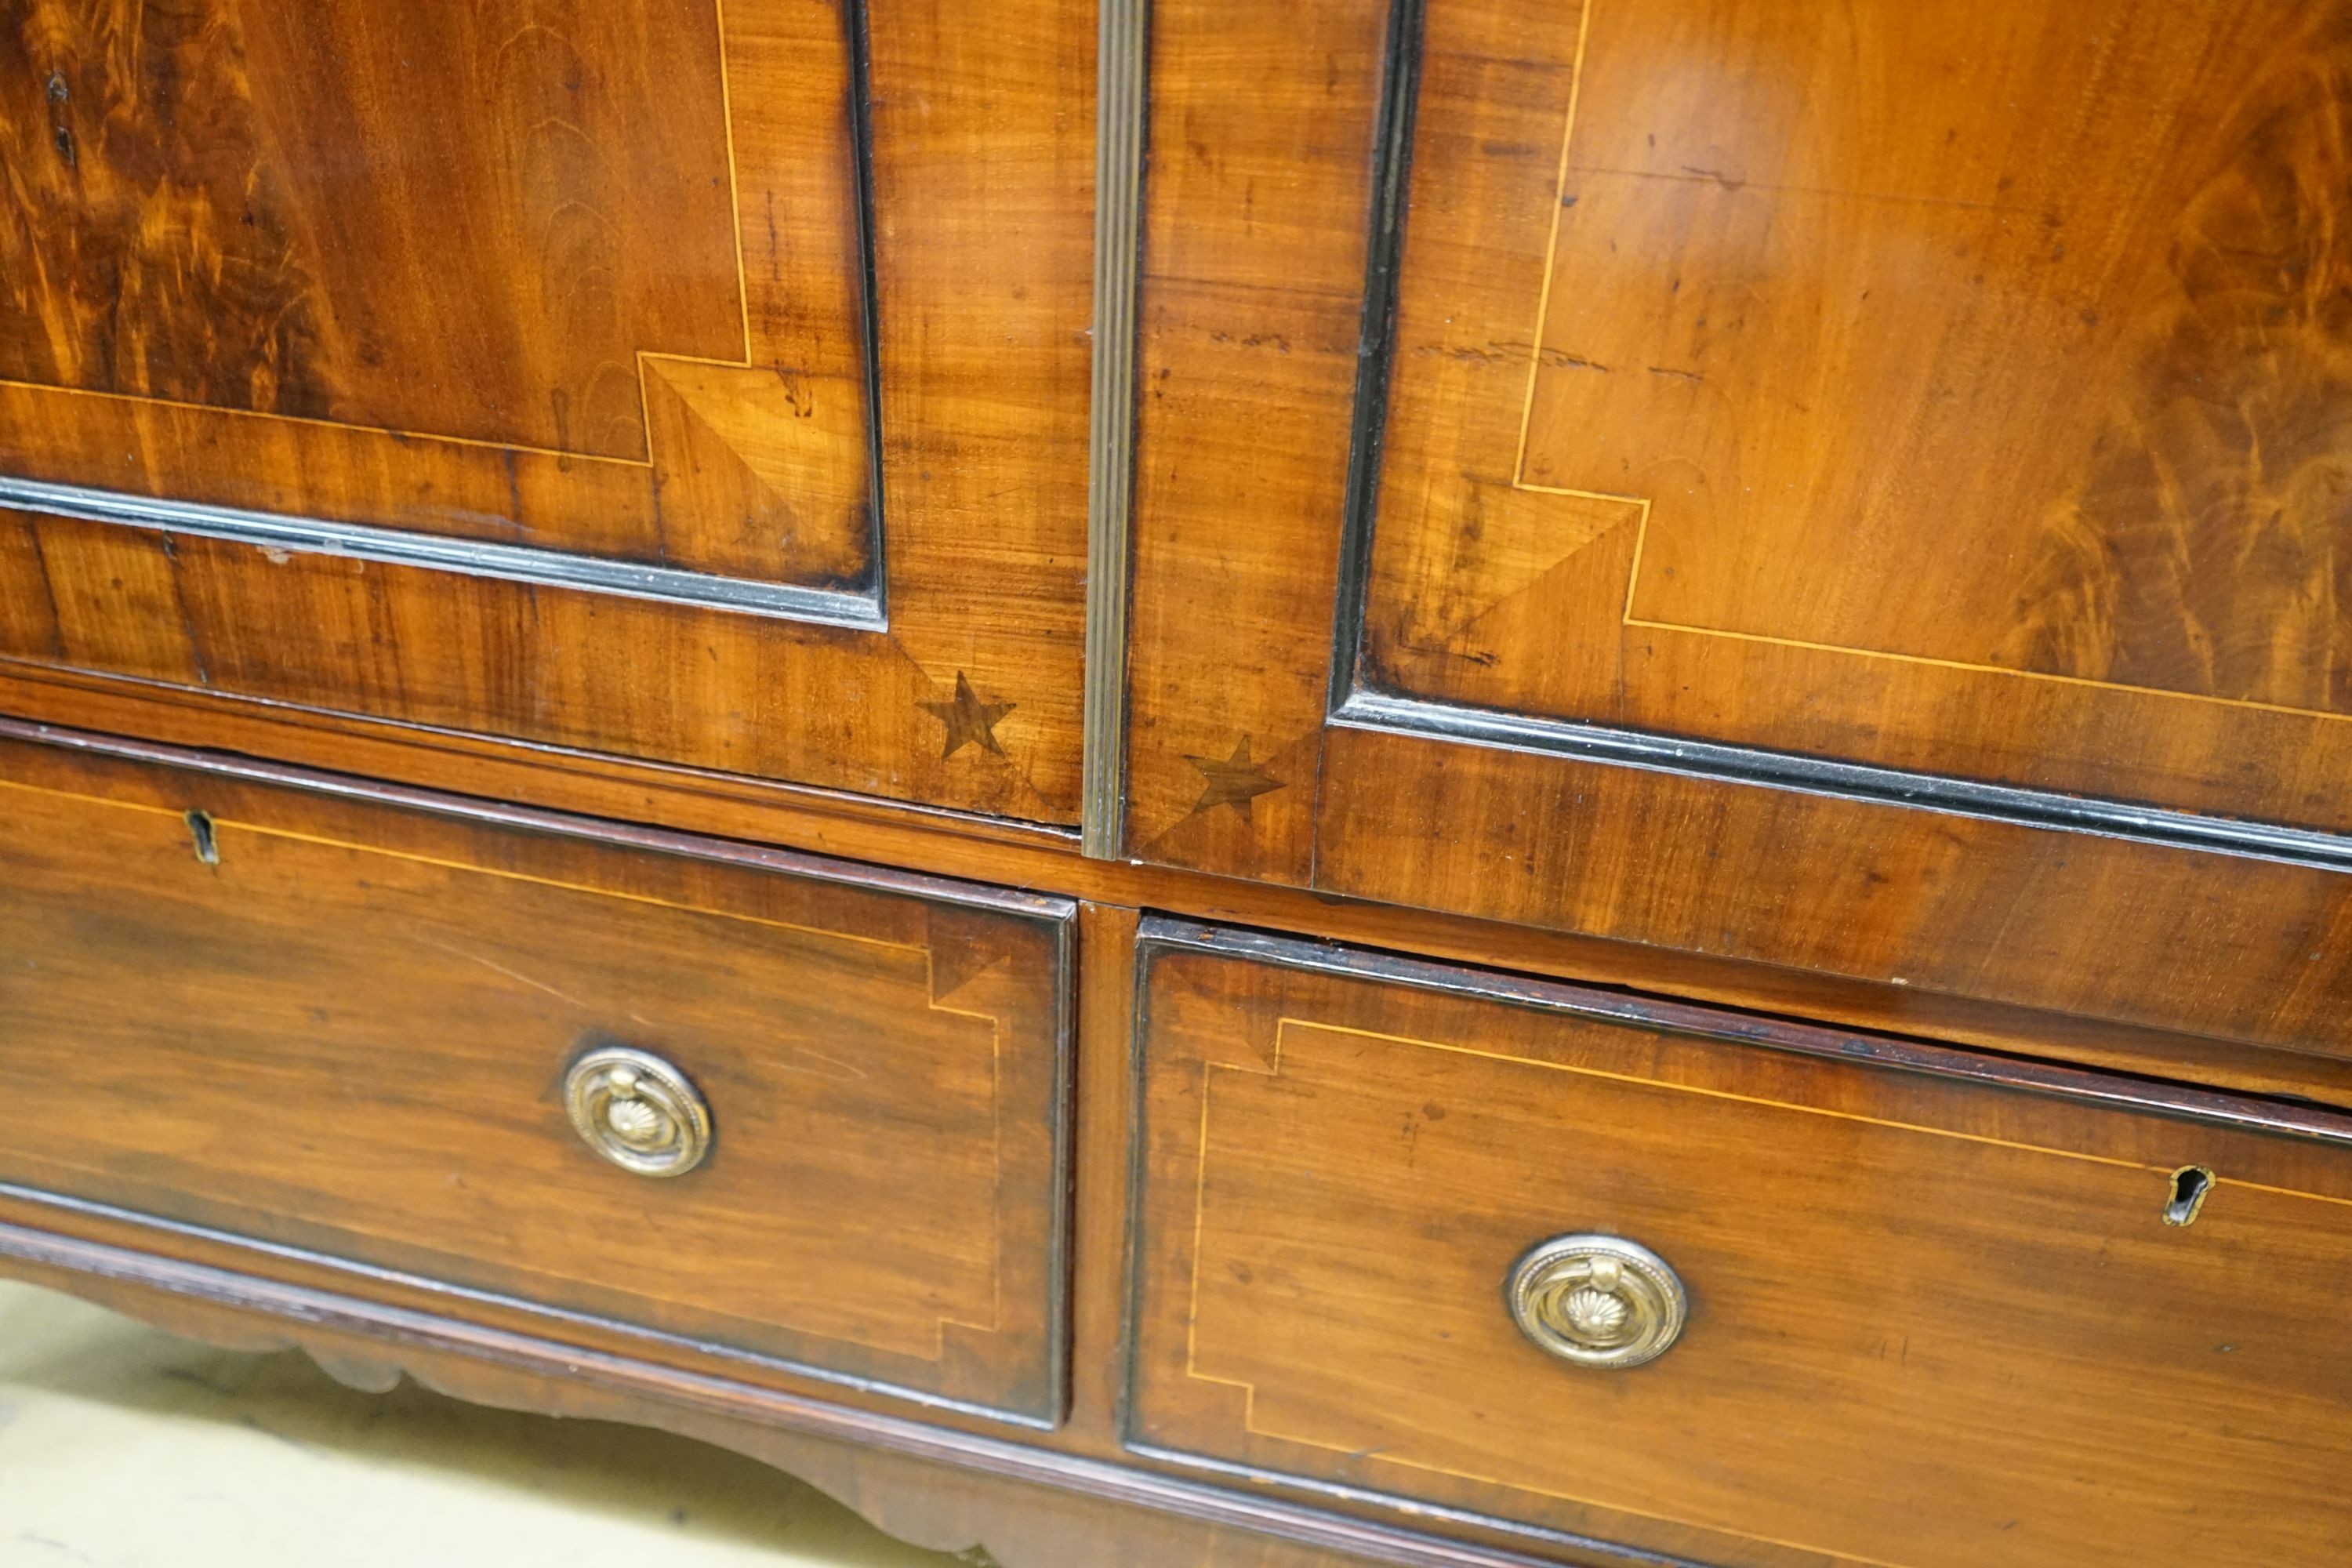 A 19th century mahogany linen press of small proportions, with panelled flamed mahogany doors centered with inlaid star motifs, width 133cm, depth 60cm, height 196cm